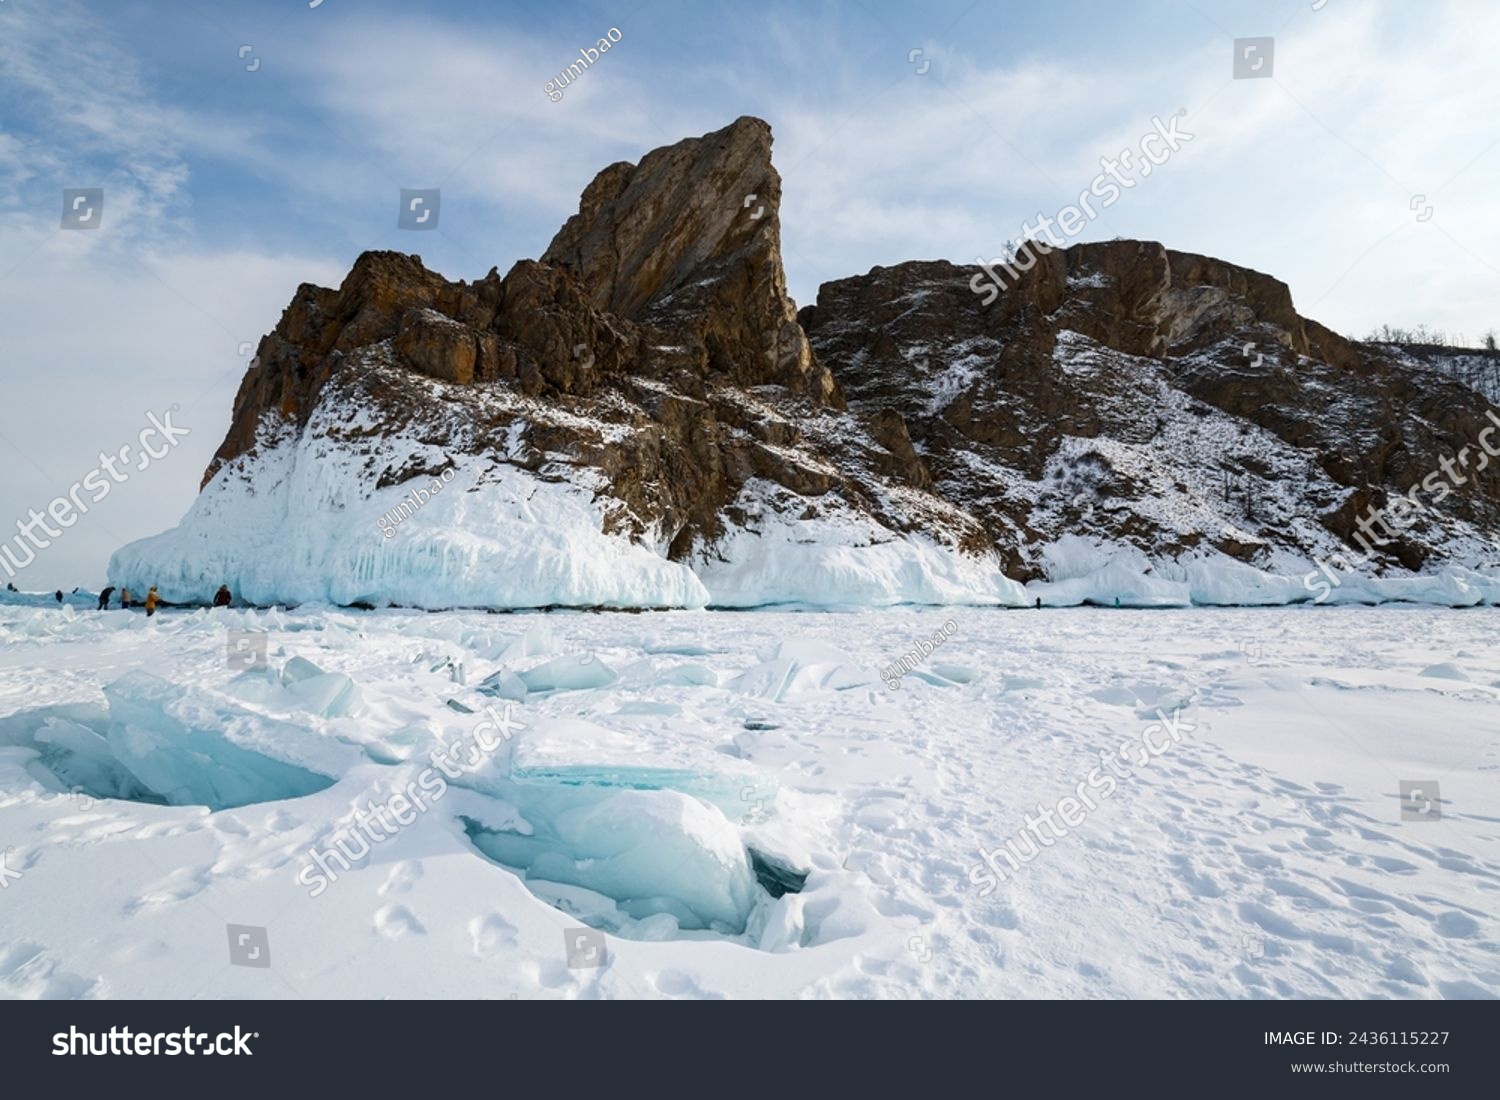 Coast of lake Baikal in winter, the deepest and largest freshwater lake by volume in the world, located in southern Siberia, Russia #2436115227